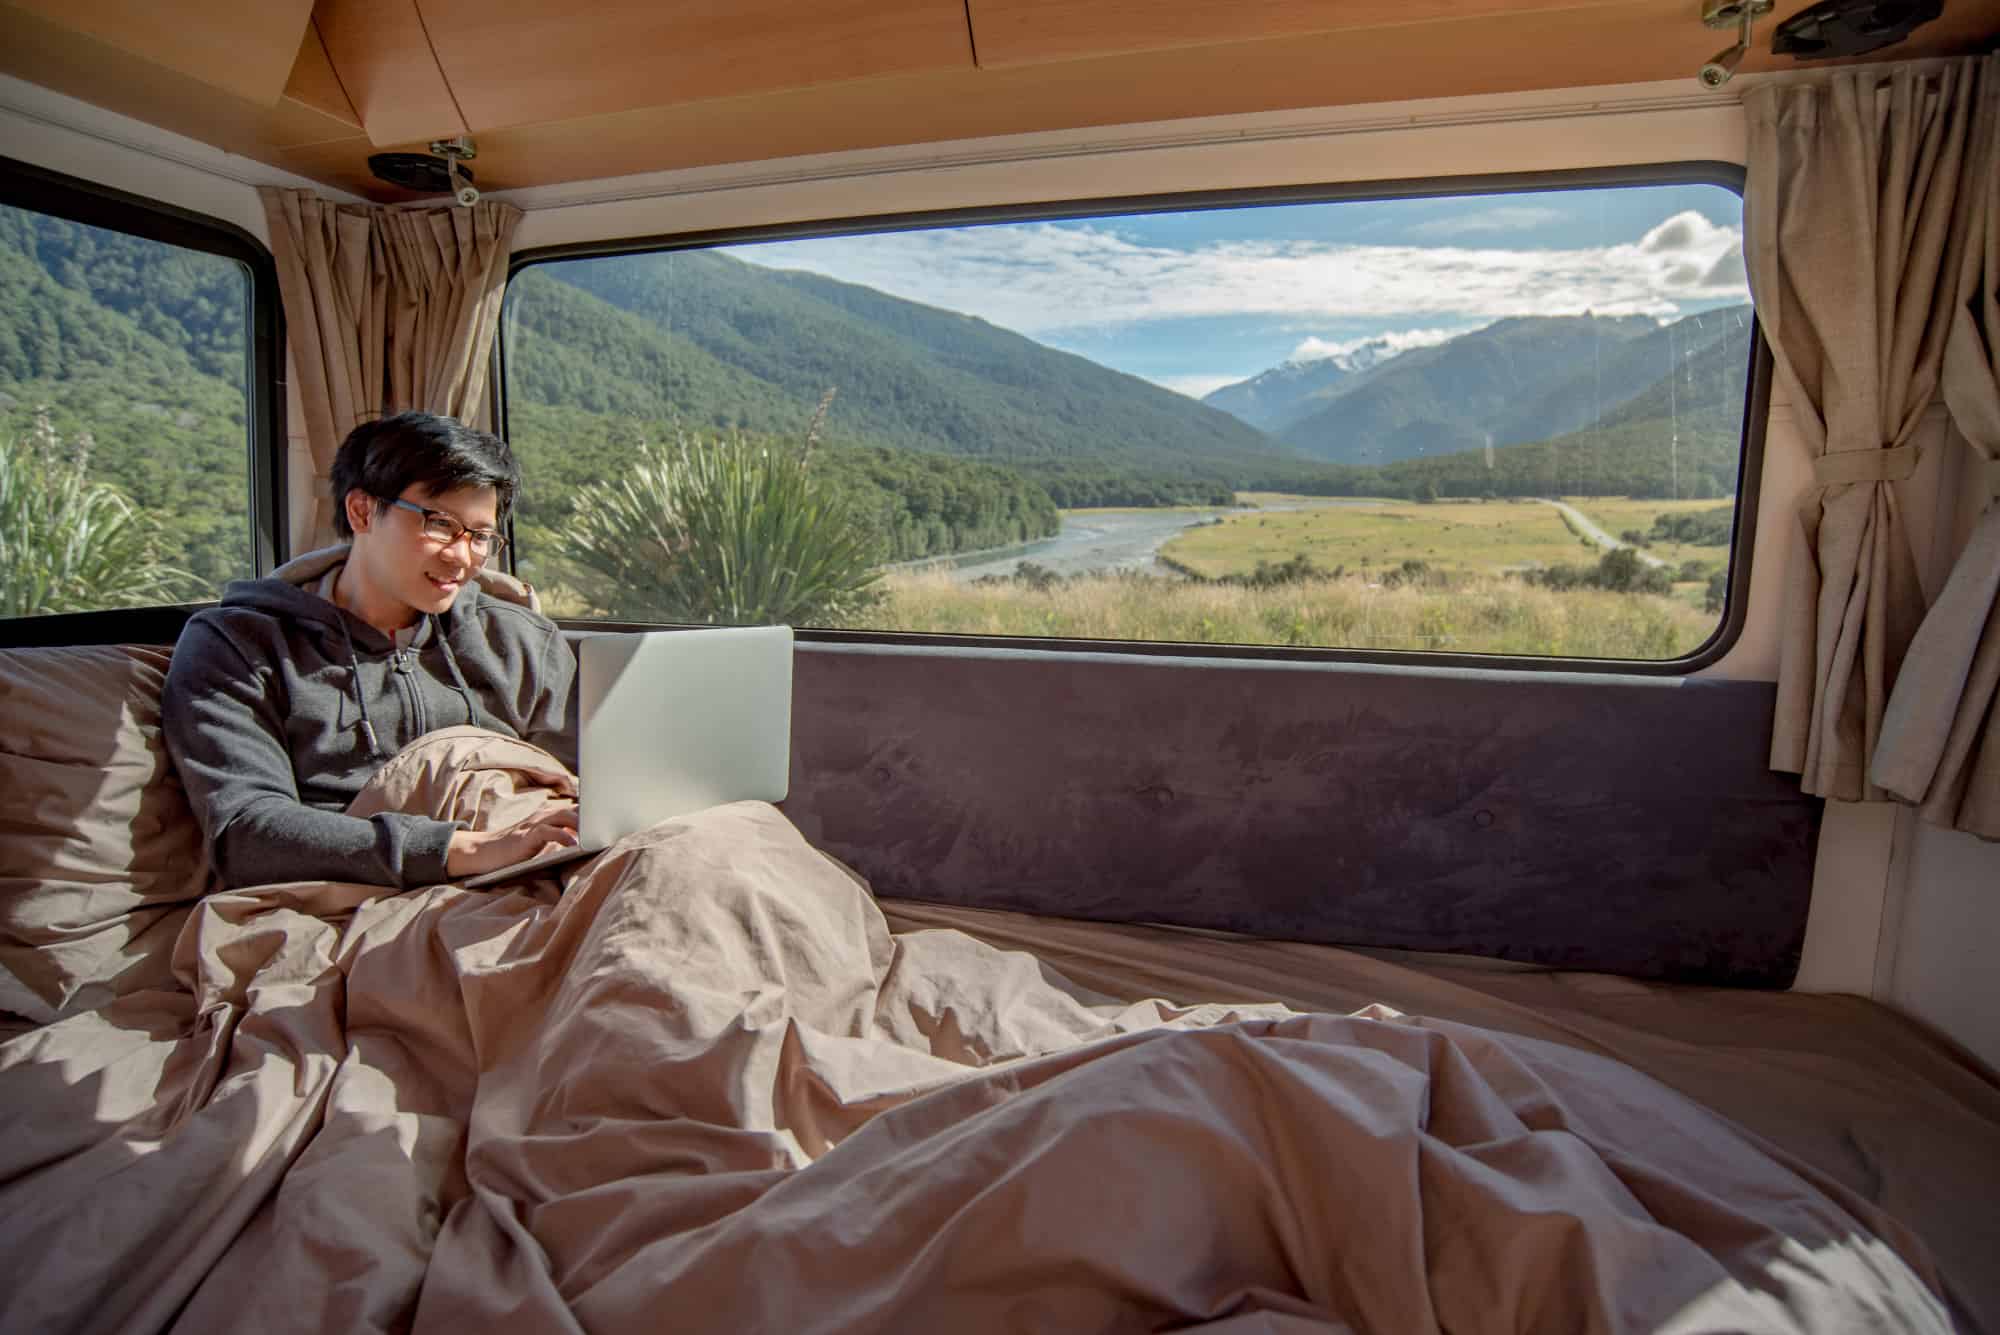 Young, male Asian digital nomad working with laptop computer on the bed with snow mountain scenic view through the window enjoying the RV lifestyle.